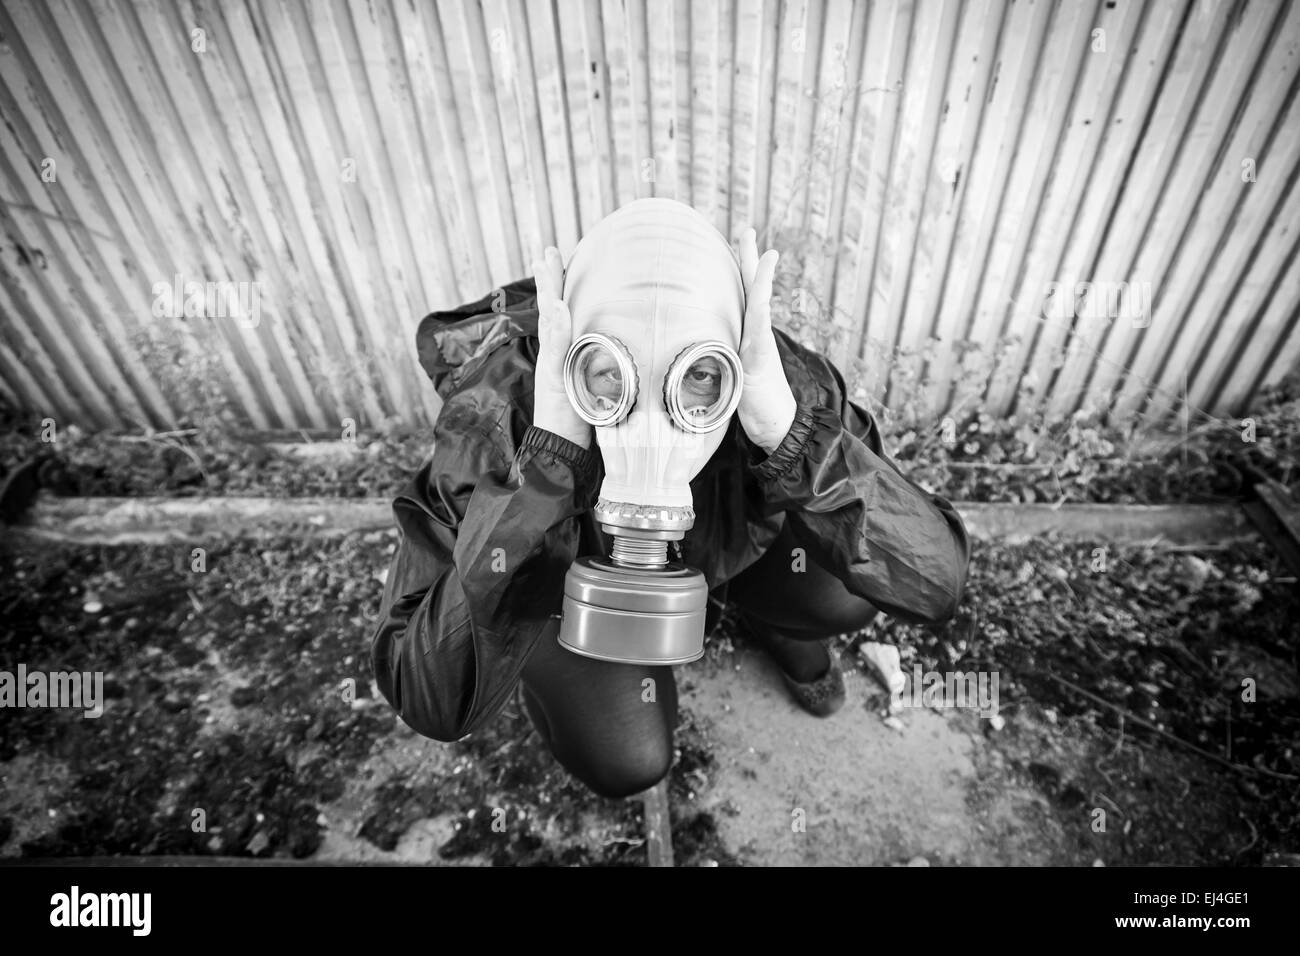 Gas mask Black and White Stock Photos & Images - Alamy